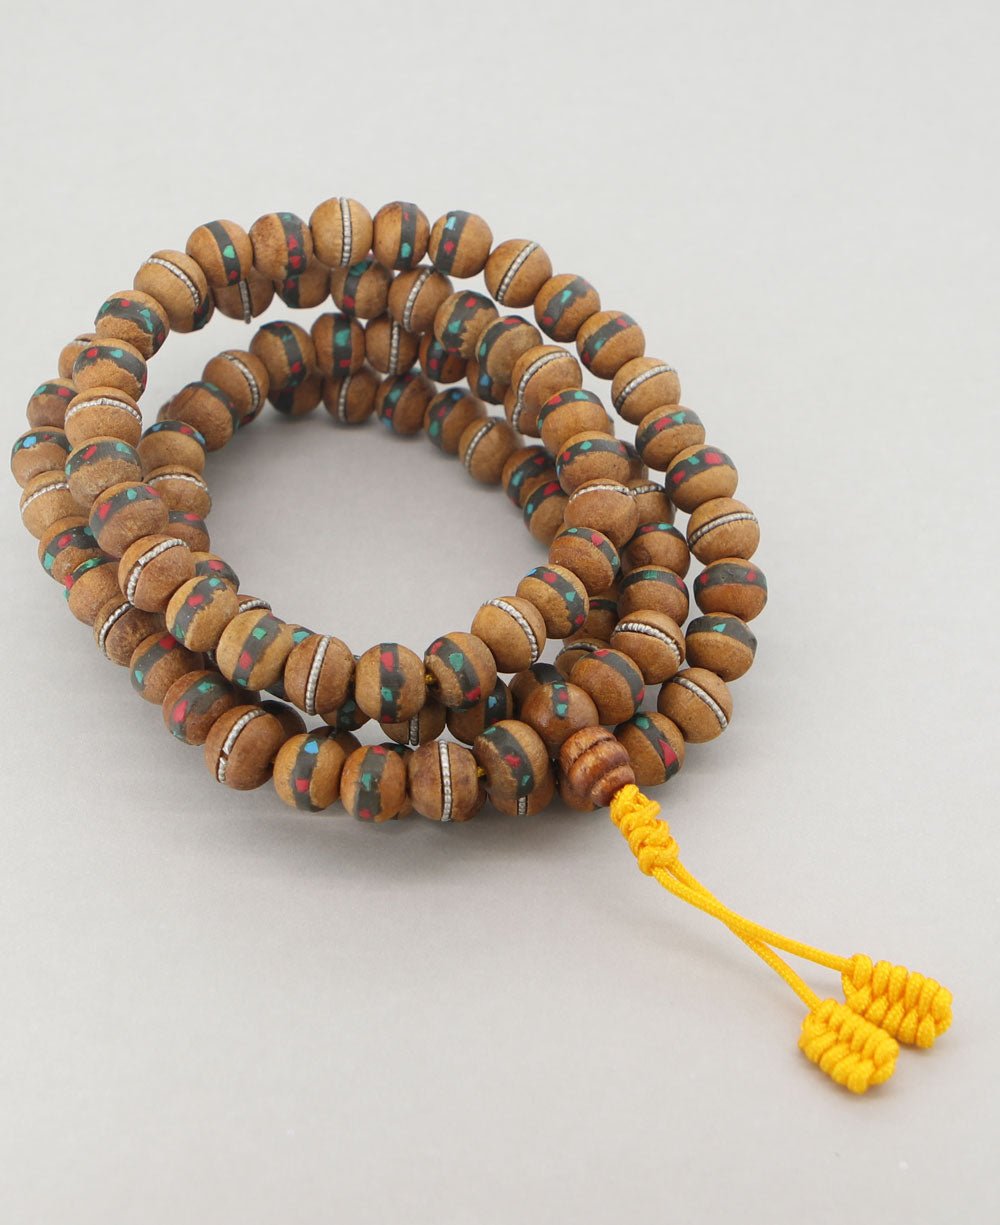 Wooden Mala with Coral and Turquoise Inlays, 108 Beads - Prayer Beads